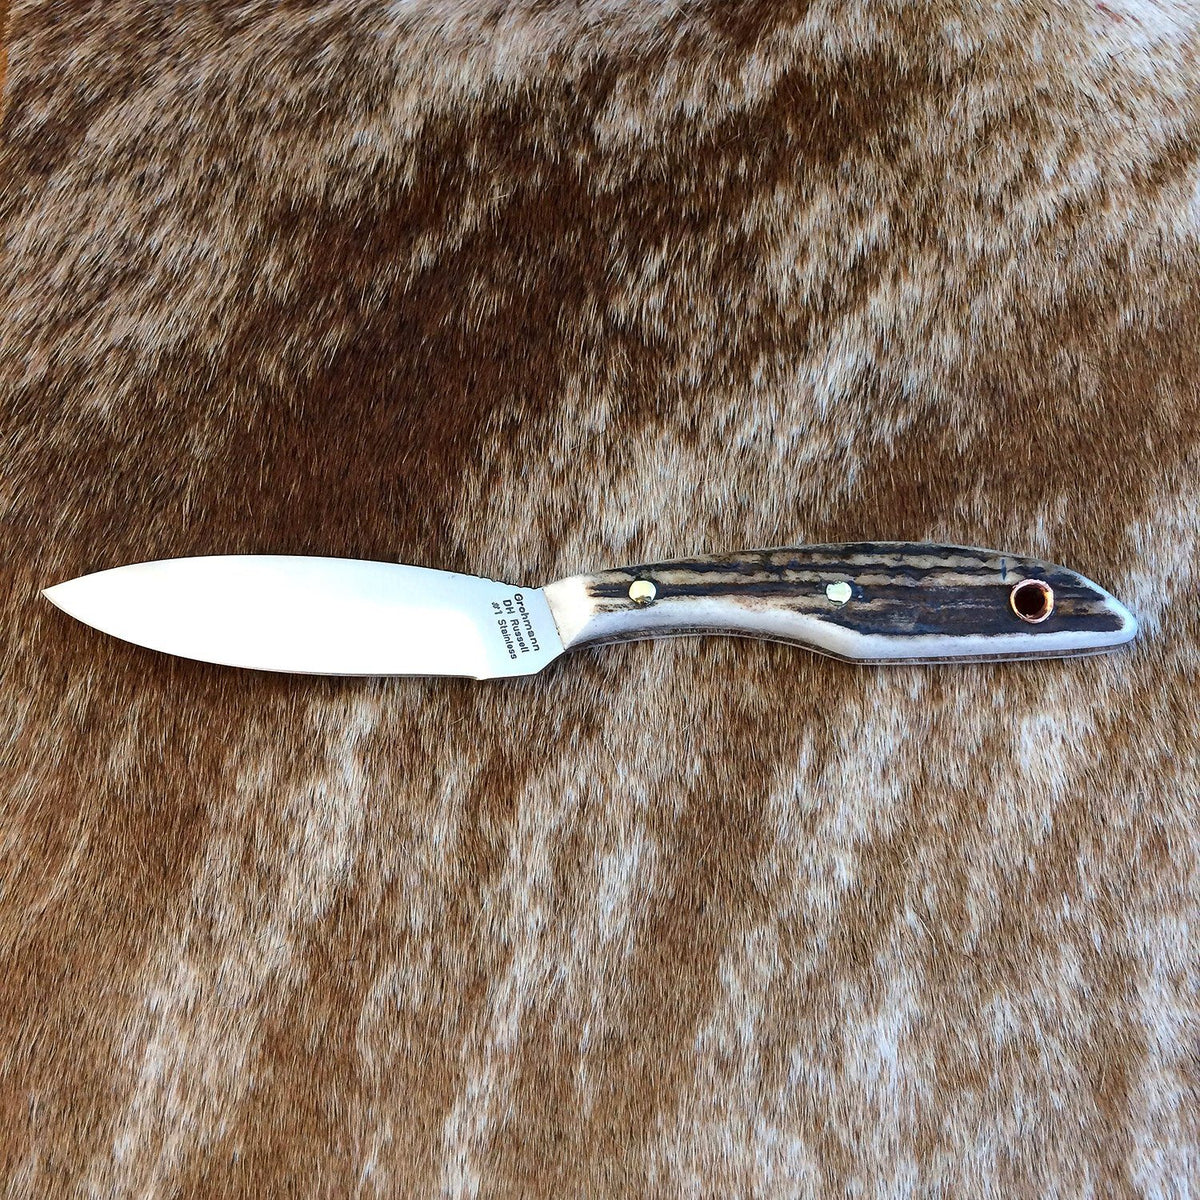 Grohmann D.H. Russell Belt Knife with Stag Horn Handle